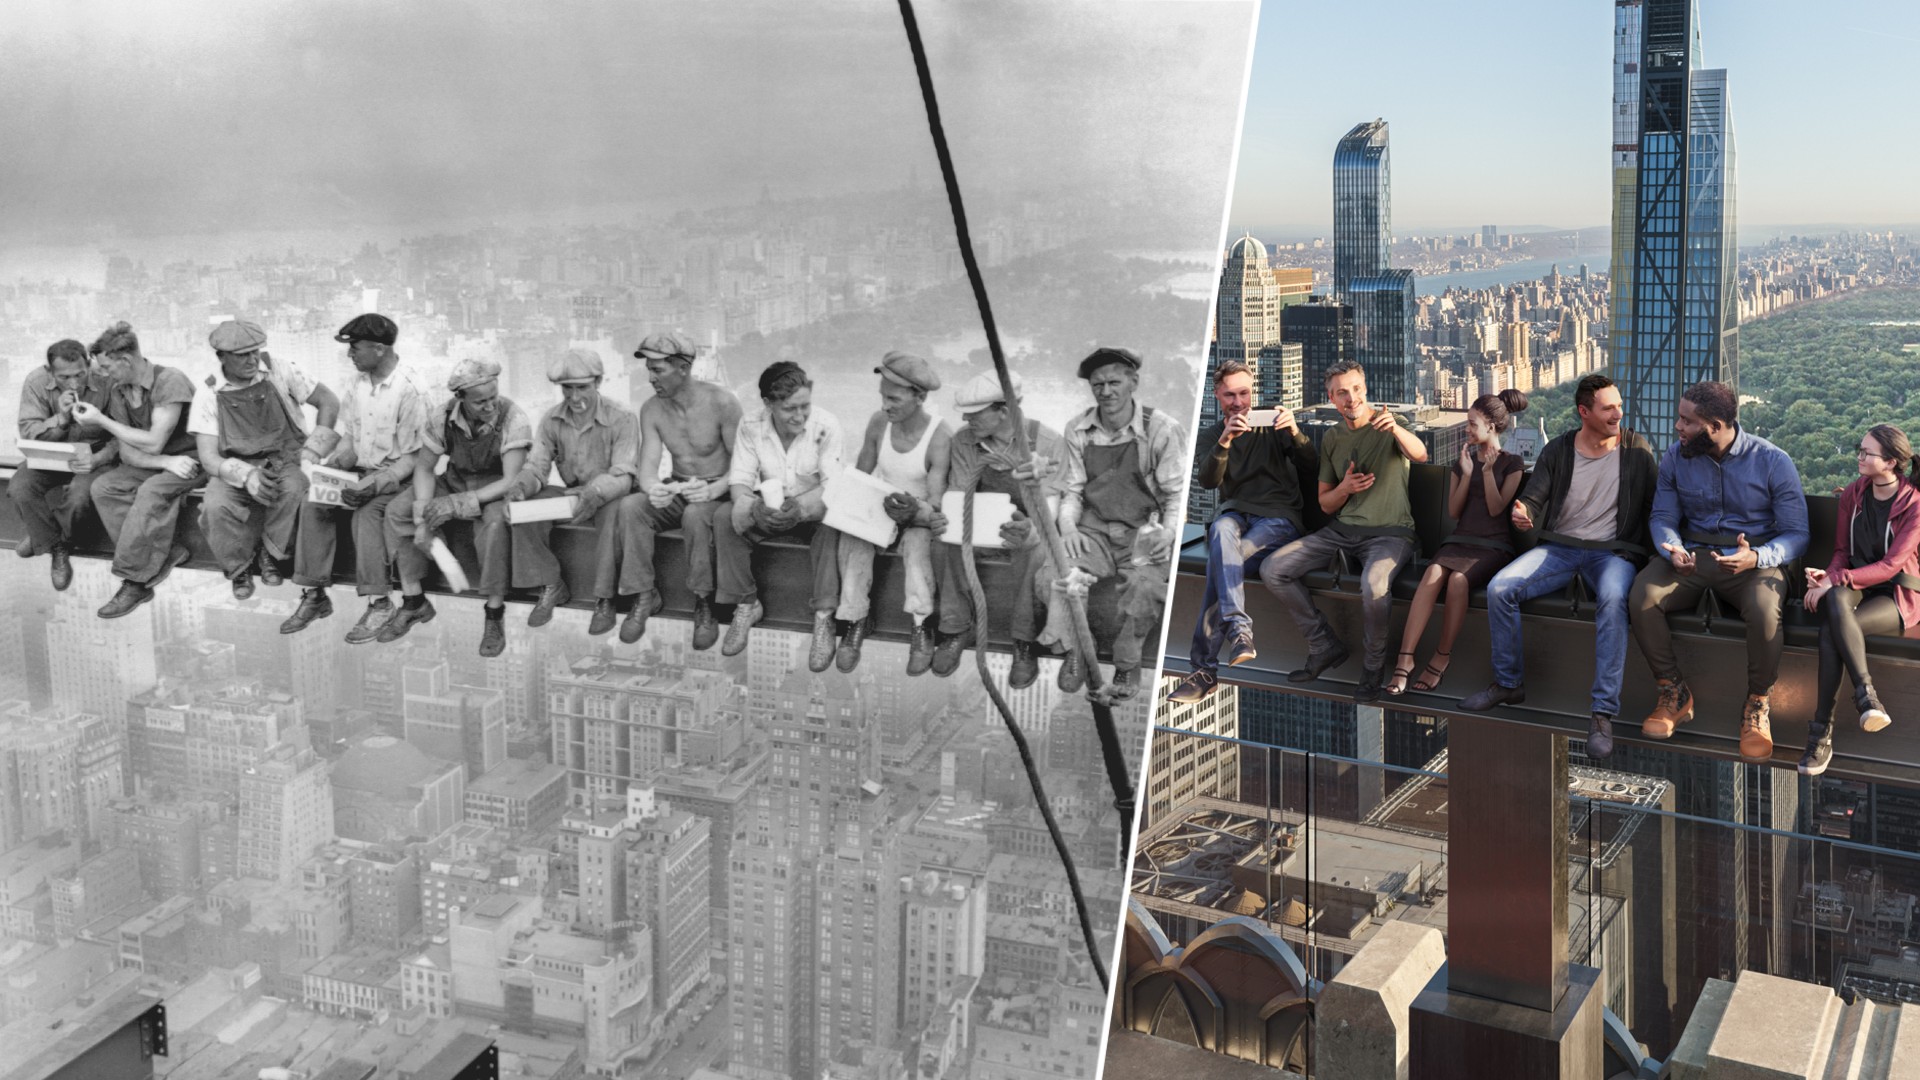 https://media.nbcnewyork.com/2021/09/Top-of-the-Rock-at-Lunch.jpg?quality=85&strip=all&fit=1920%2C1080